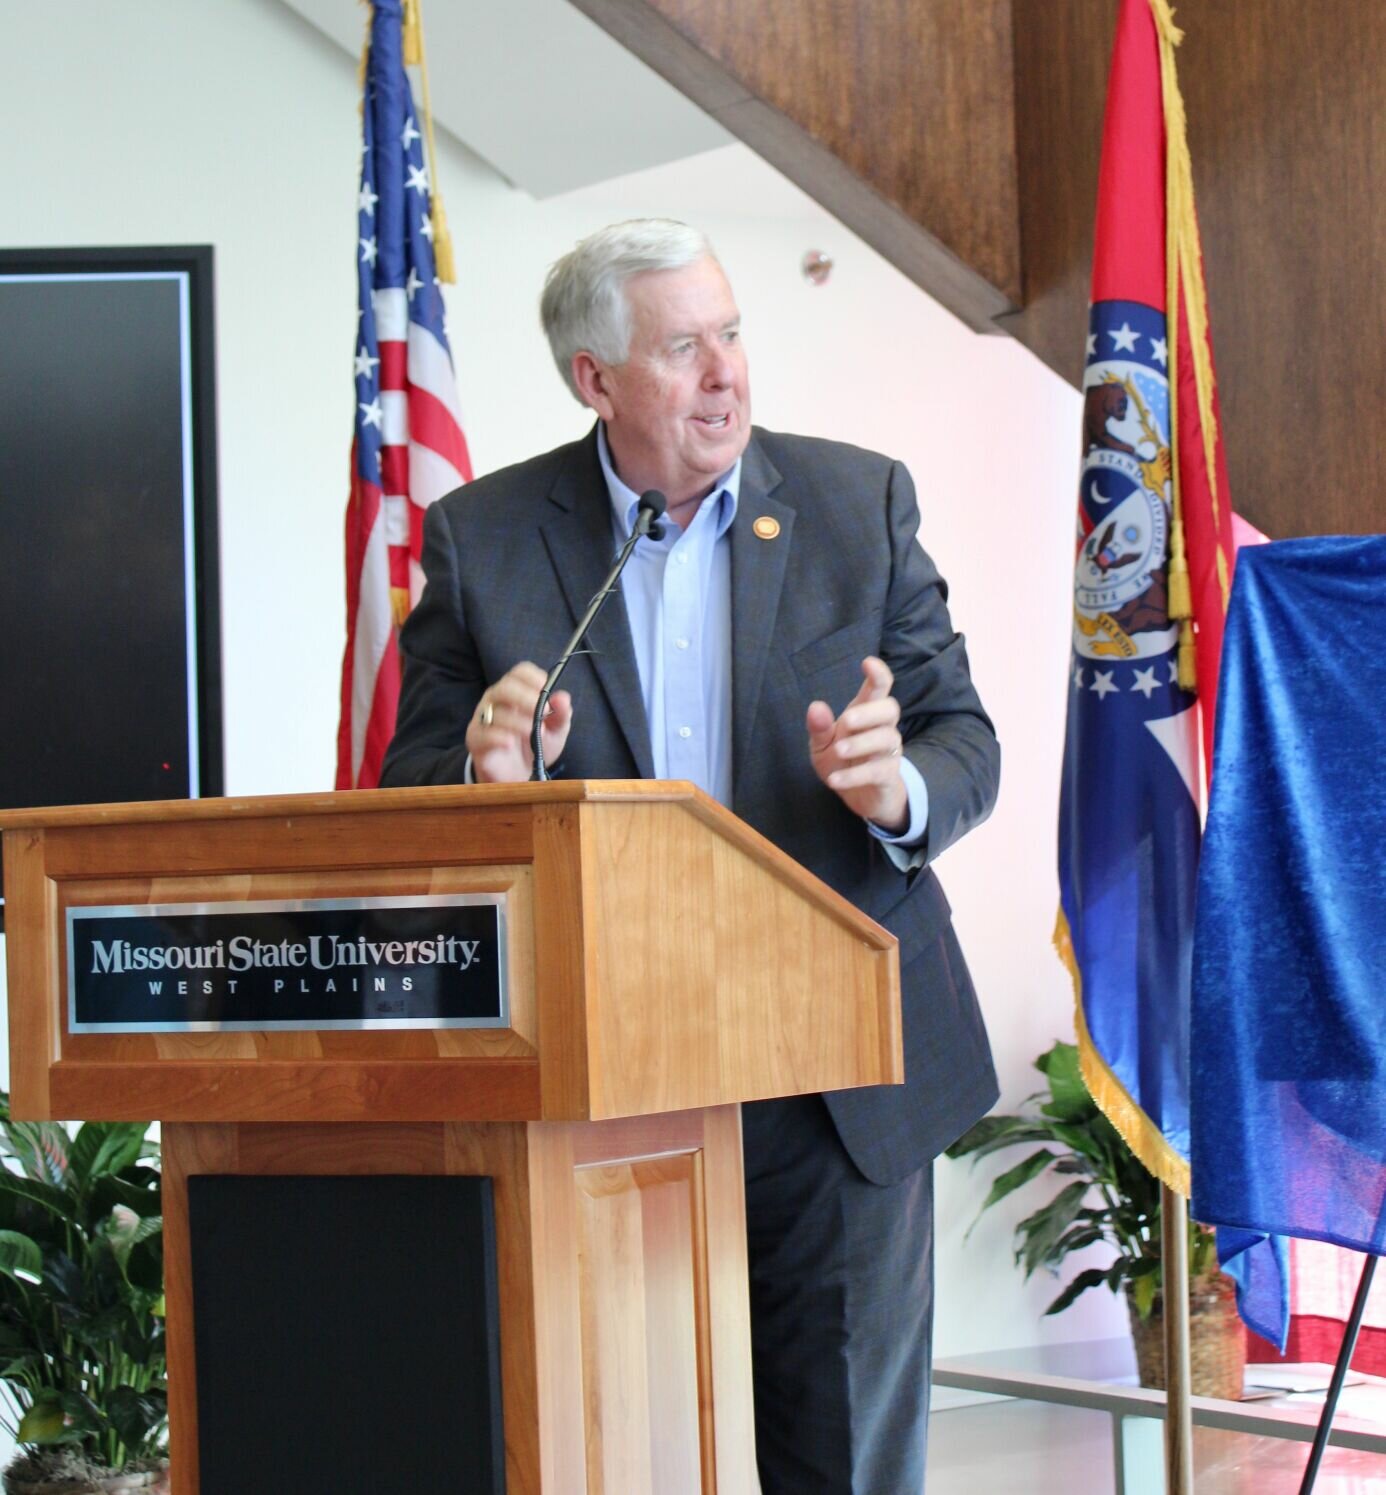 Gov. Mike Parson gave remarks on Tuesday preceding the groundbreaking of a building on the Missouri State University-West Plains campus that will house the university's TJ Swift House A.S.C.E.N.D. Program. A.S.C.E.N.D. stands for Autism Support Can Empower New Directions, and is already in place at MSU-WP, offering support services for students with autism. Other speakers included MSU President Clif Smart, MSU-WP Chancellor Dennis Lancaster, Tracey Hollis of TJ Swift House and 33rd District State Sen. Karla Eslinger, who introduced Parson.